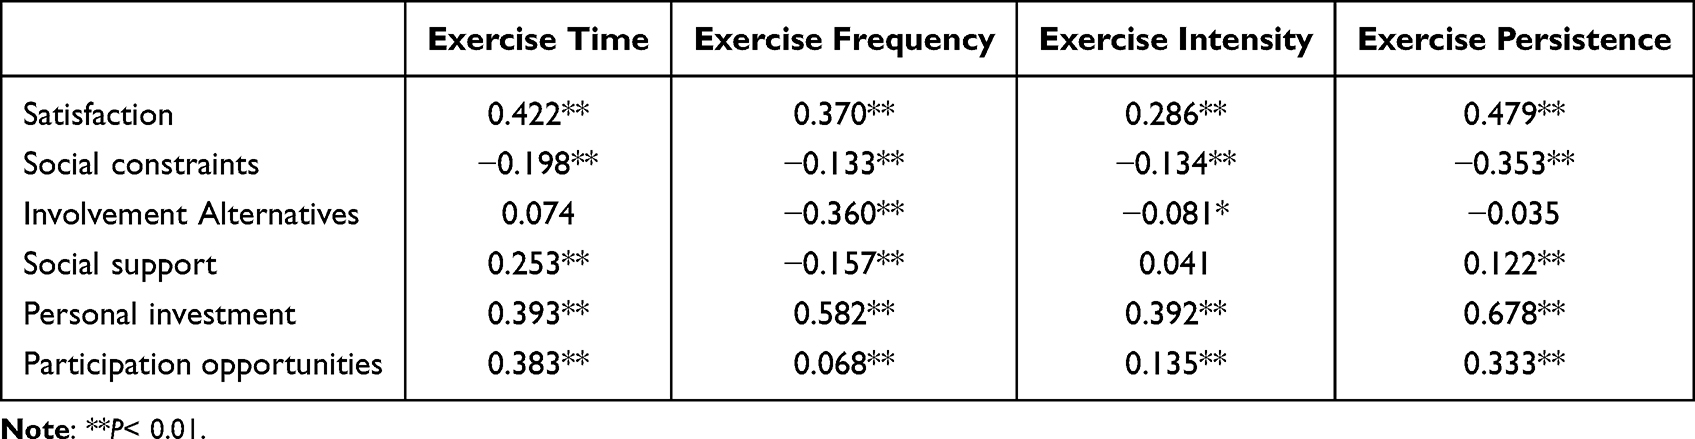 Personality traits, sports commitment, and exercise behavior